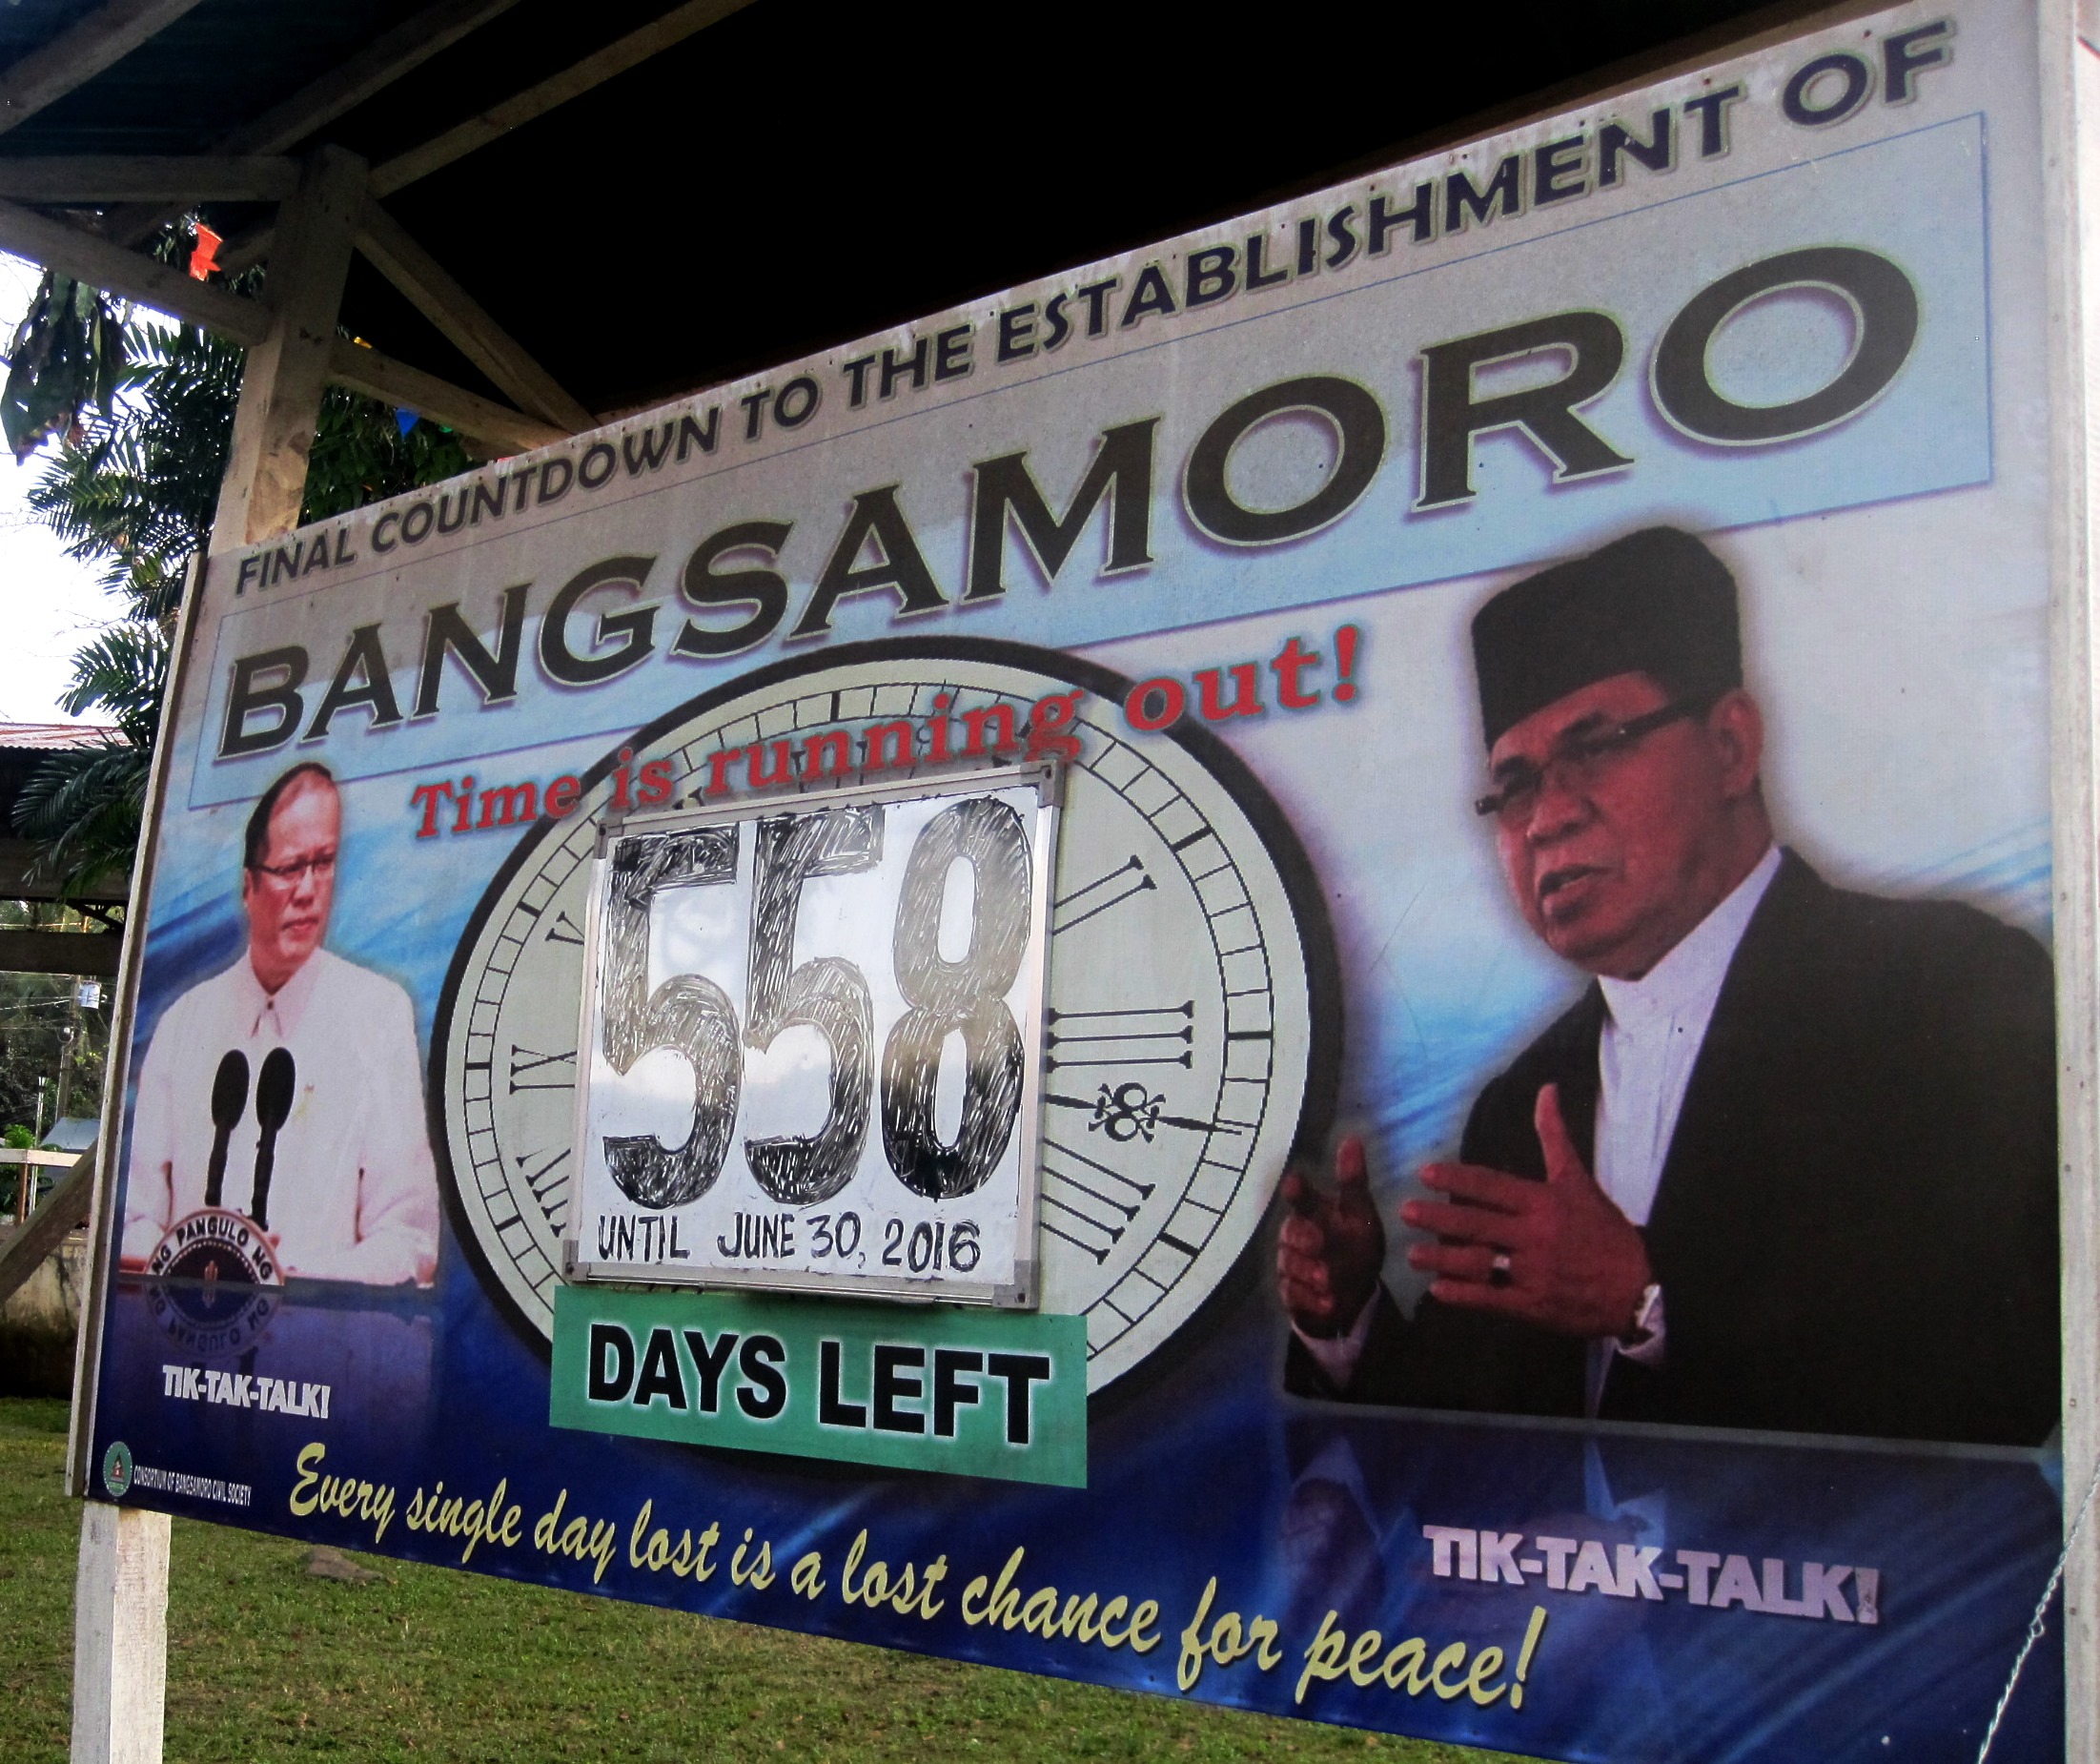 Countdown to Bangsamoro, in the town of Upi in Maguindanao, before the Mamasapano incident